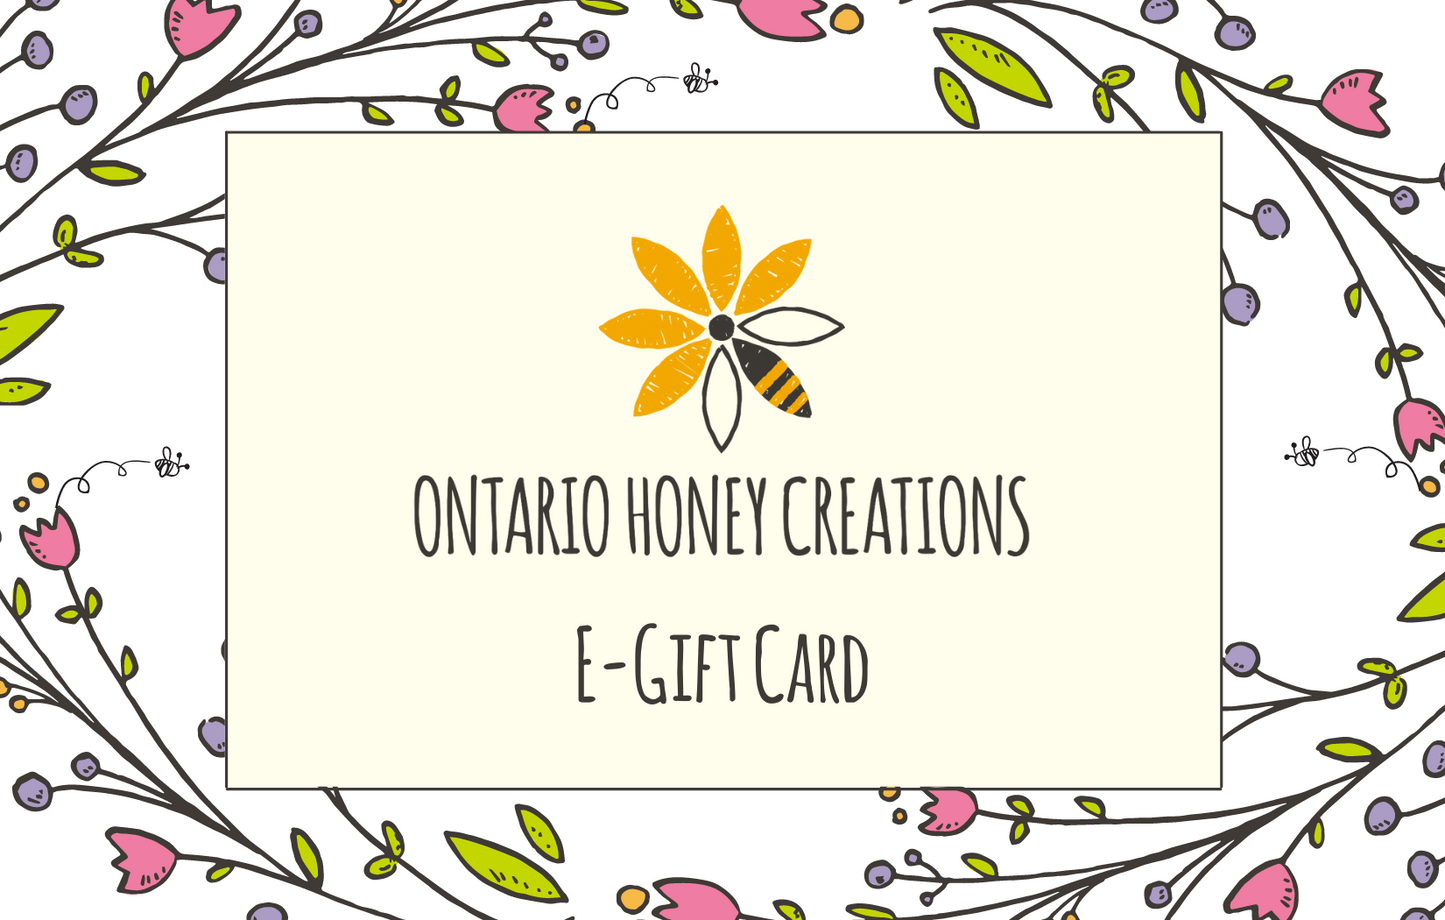 Load image into Gallery viewer, Image of Ontario Honey Creations E-gift card with drawings of purple and pink flowers in the background. 
